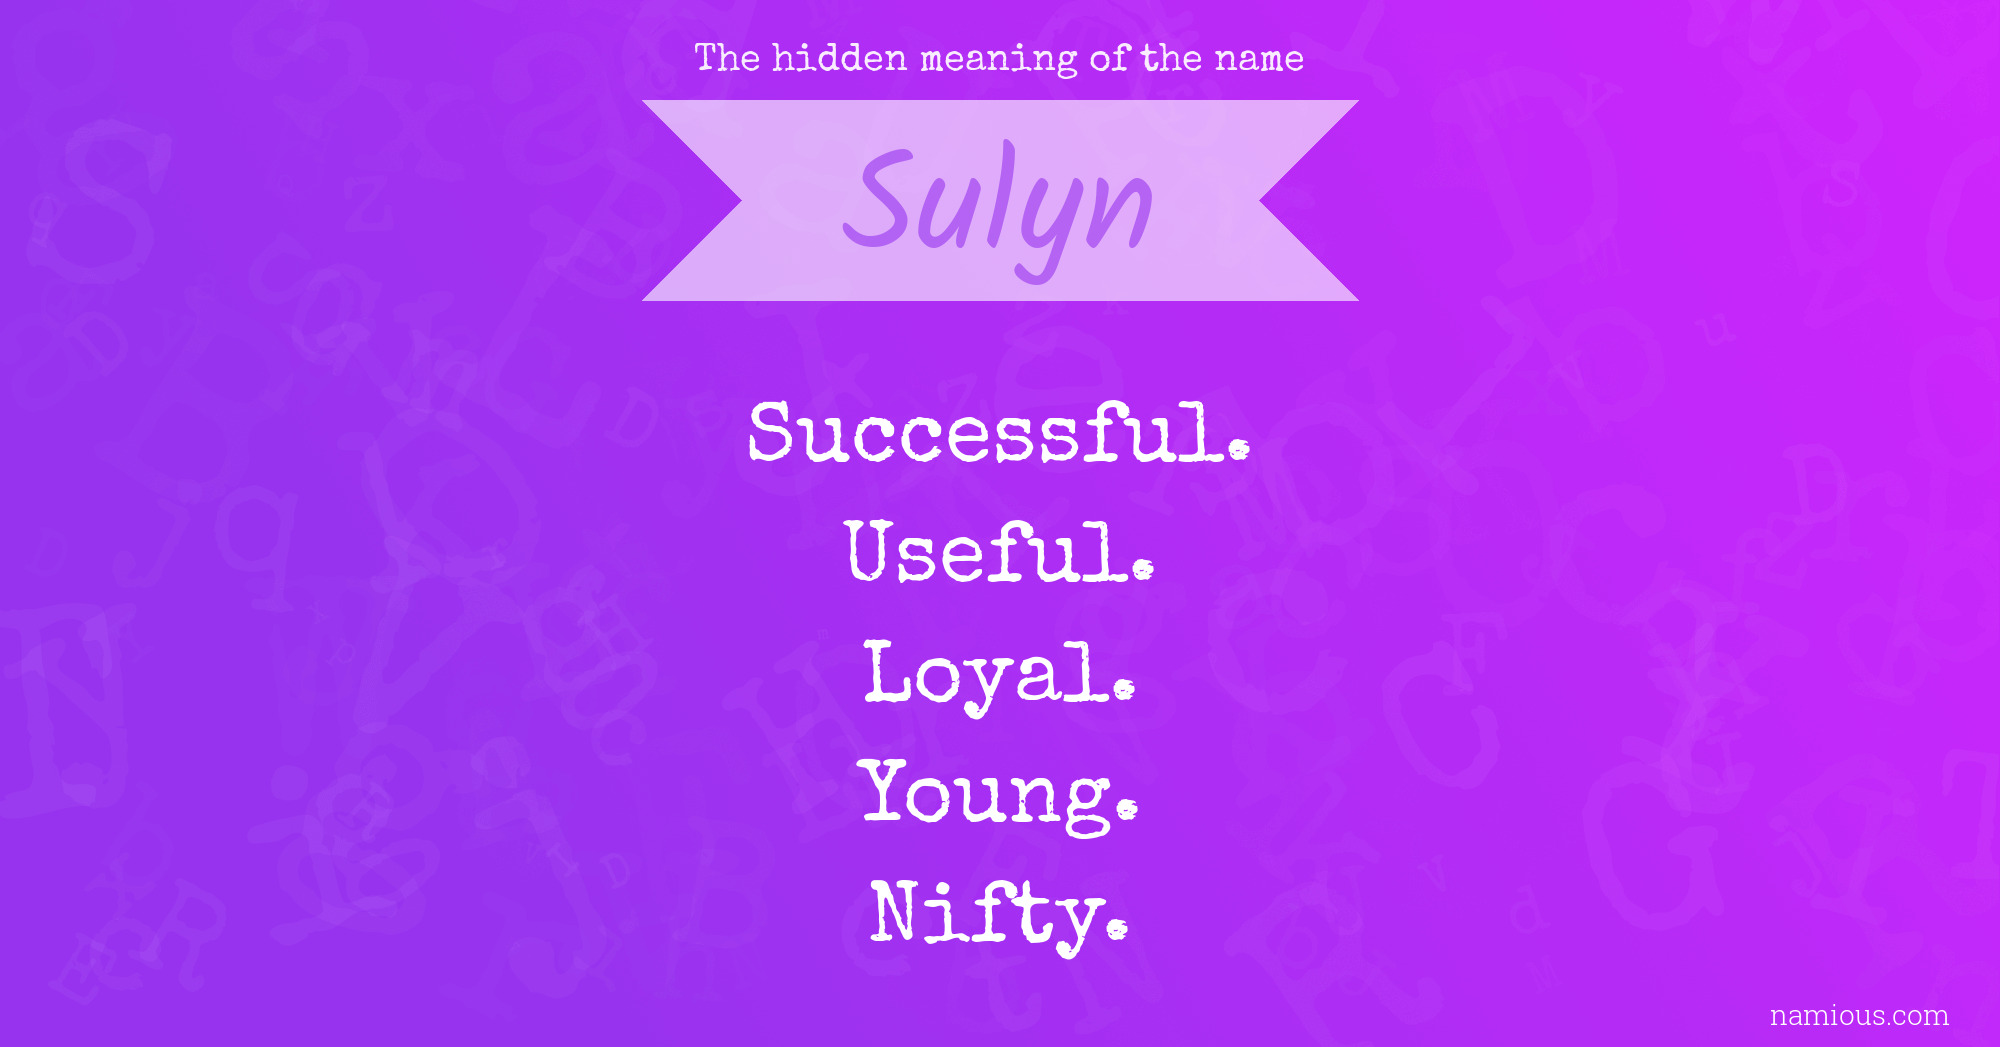 The hidden meaning of the name Sulyn